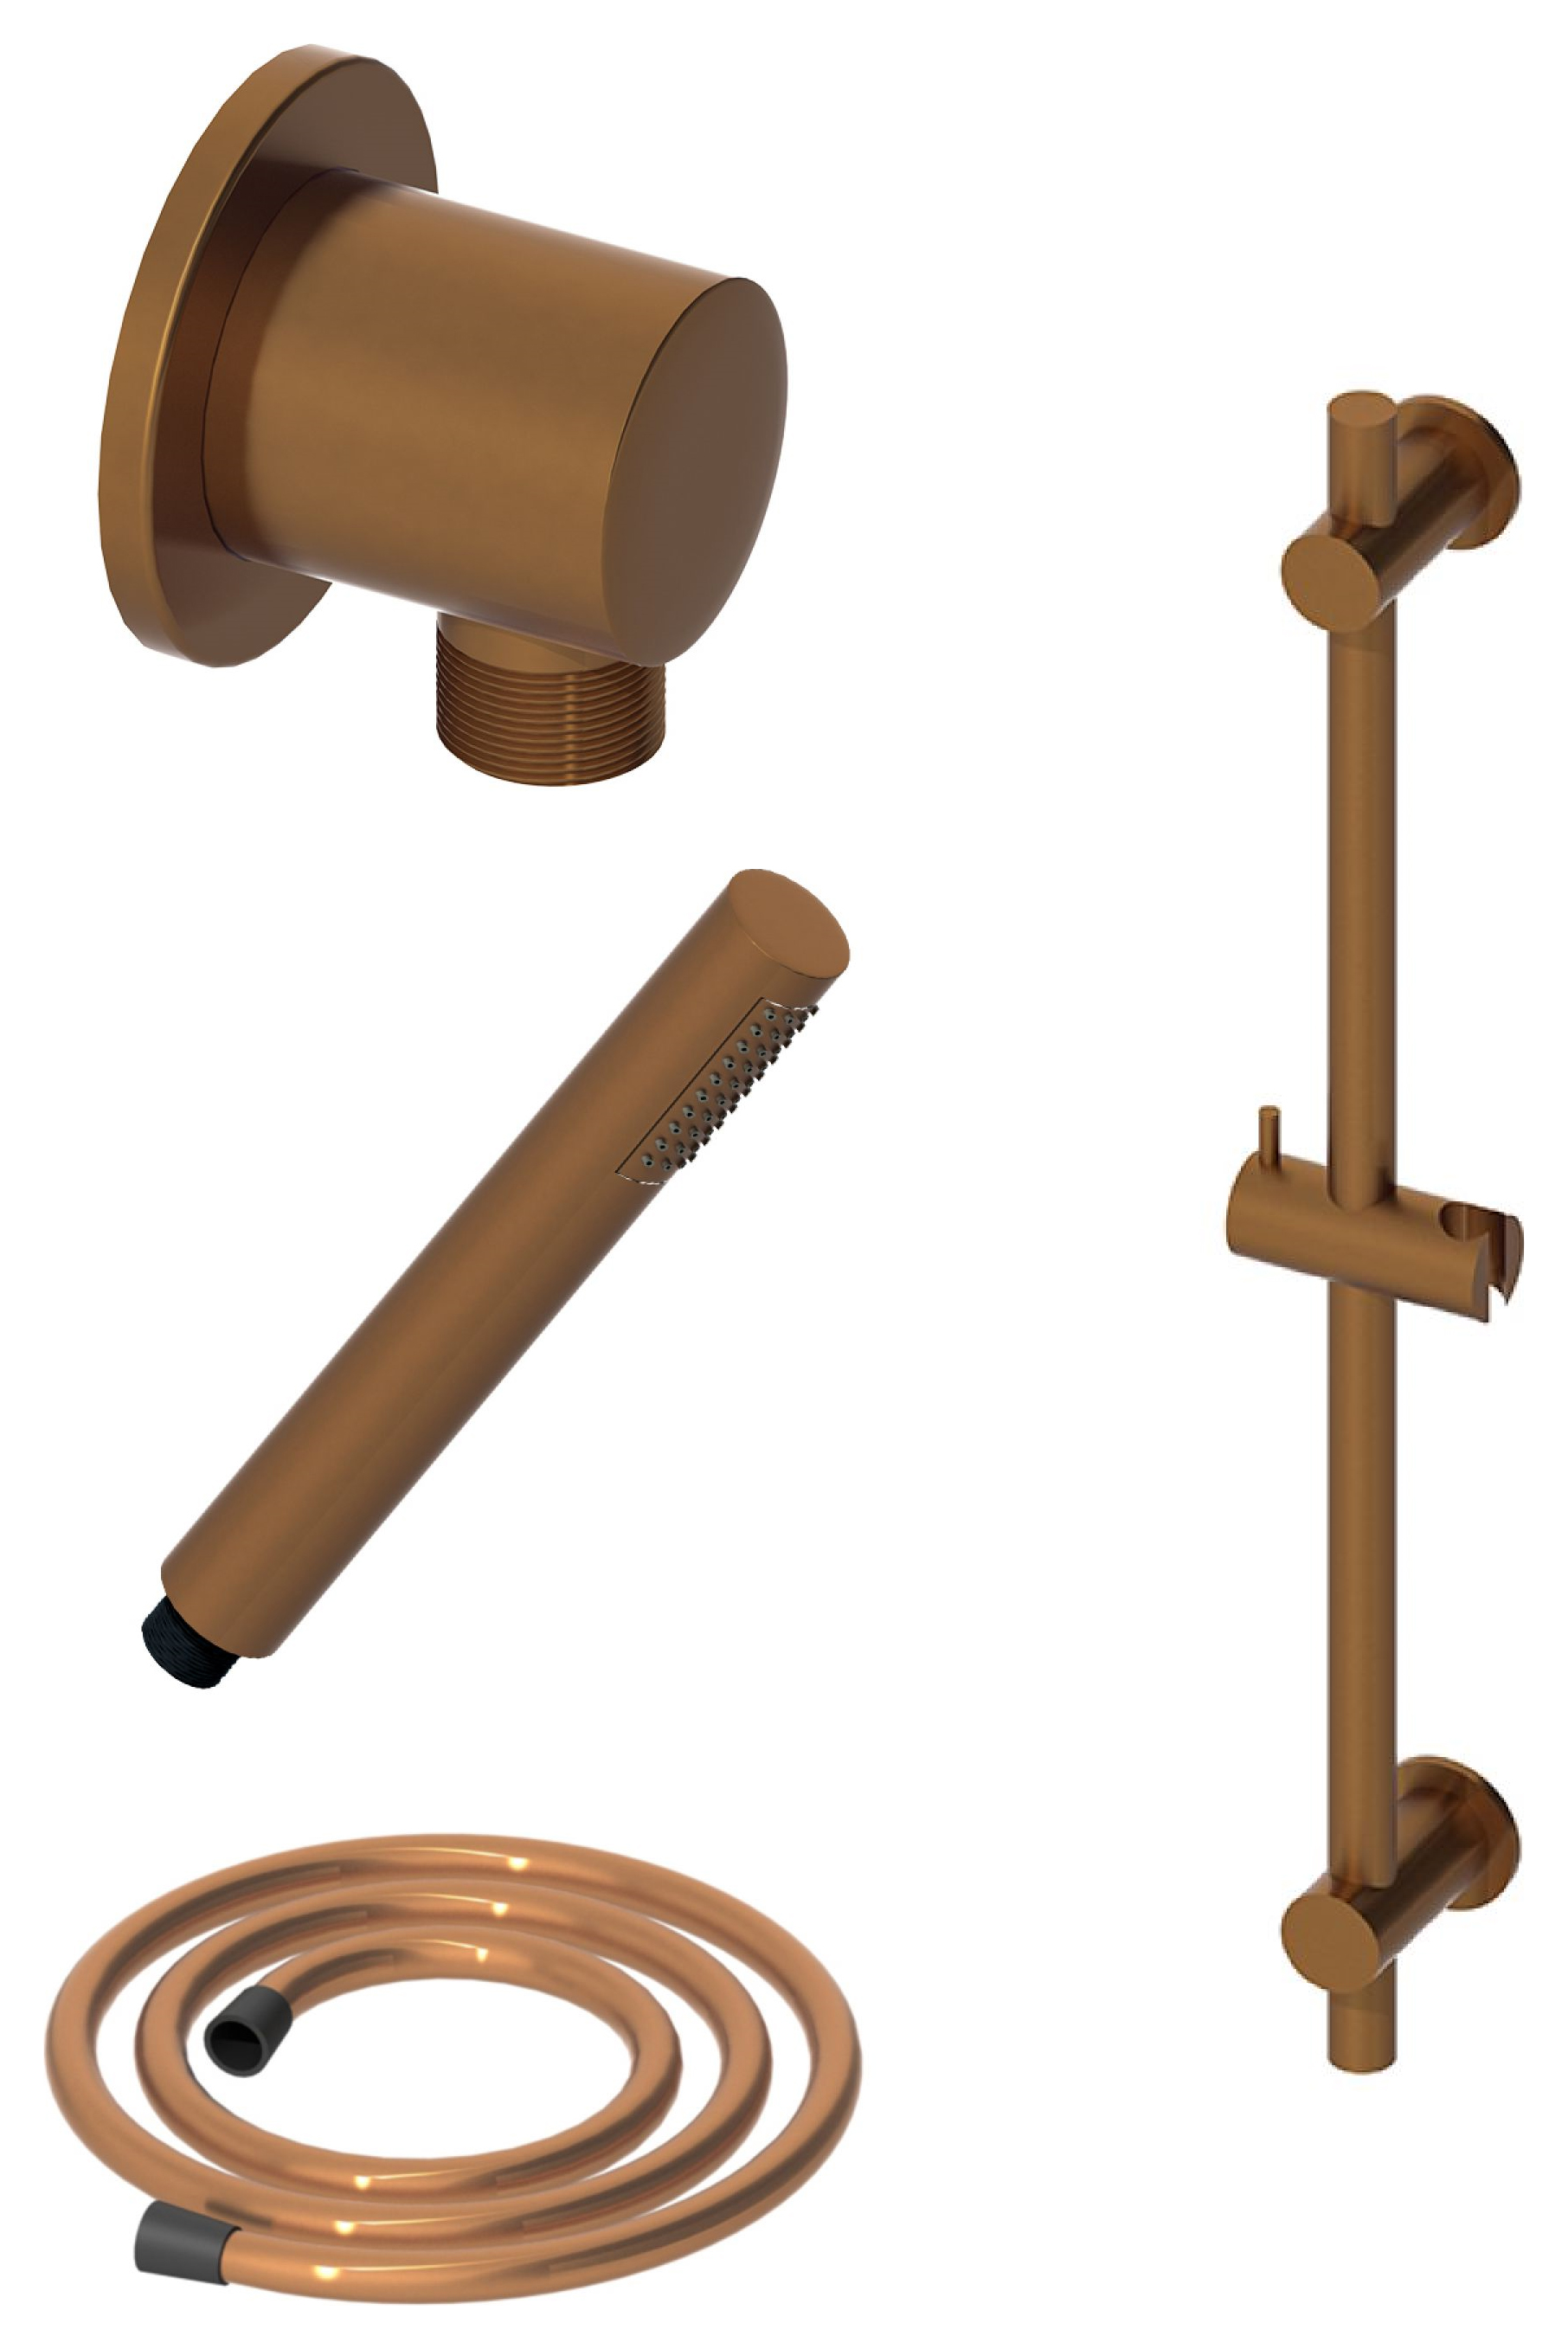 Image of Hadleigh Shower Riser Rail, Wall Outlet, 1.6m Hose & Handset Accessories Kit in Brushed Bronze